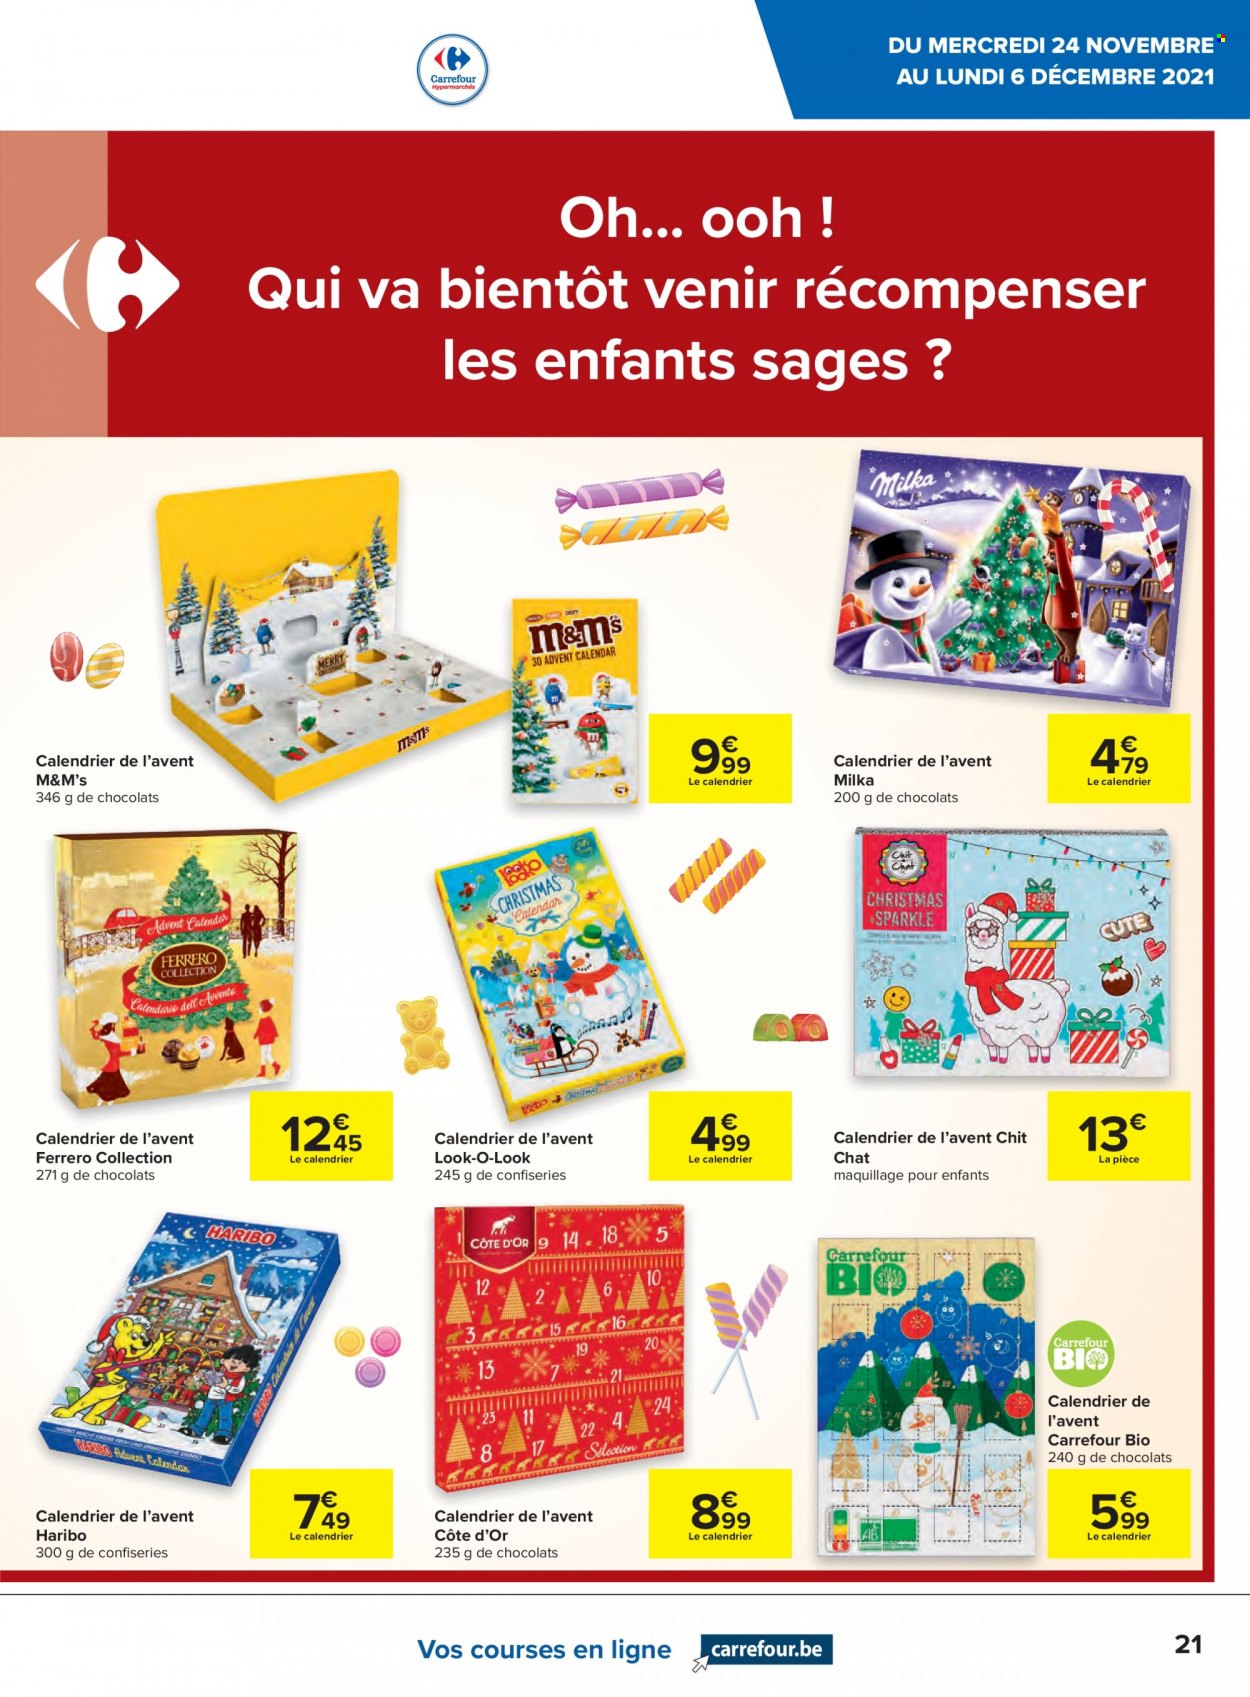 Catalogue Carrefour hypermarkt - 24.11.2021 - 6.12.2021. Page 21.